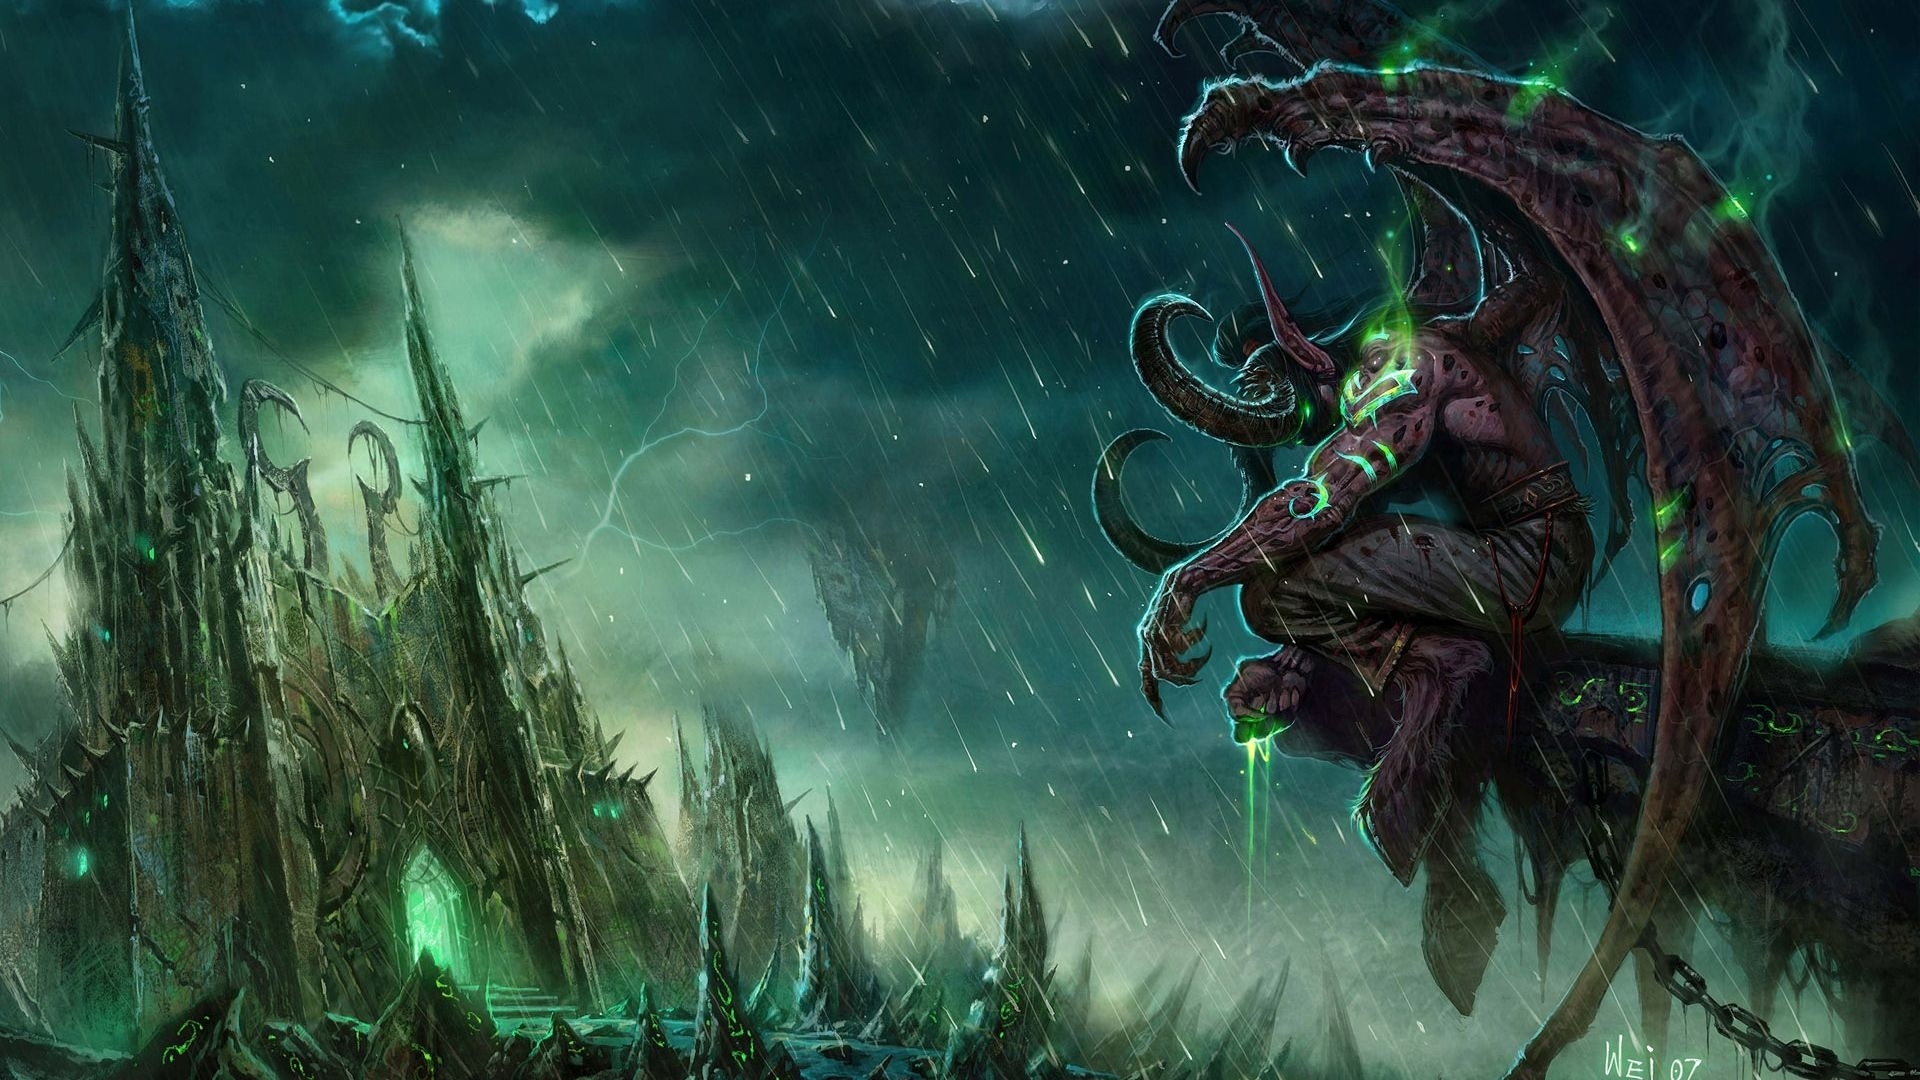 world of warcraft wallpapers hd 1080p wallpaper 101465 | wallpapers